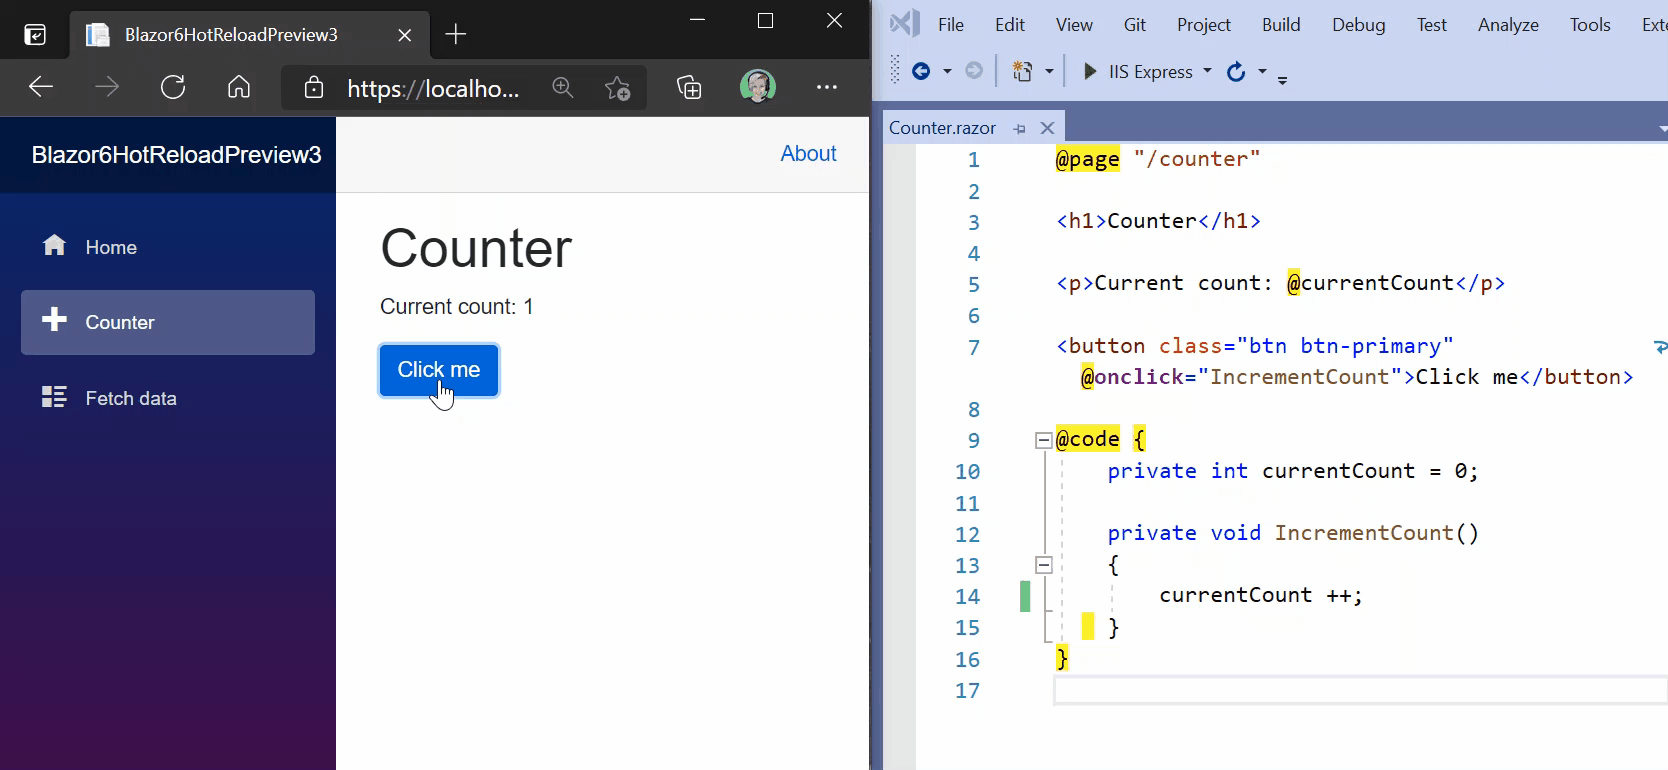 .NET 6 Preview 3 released